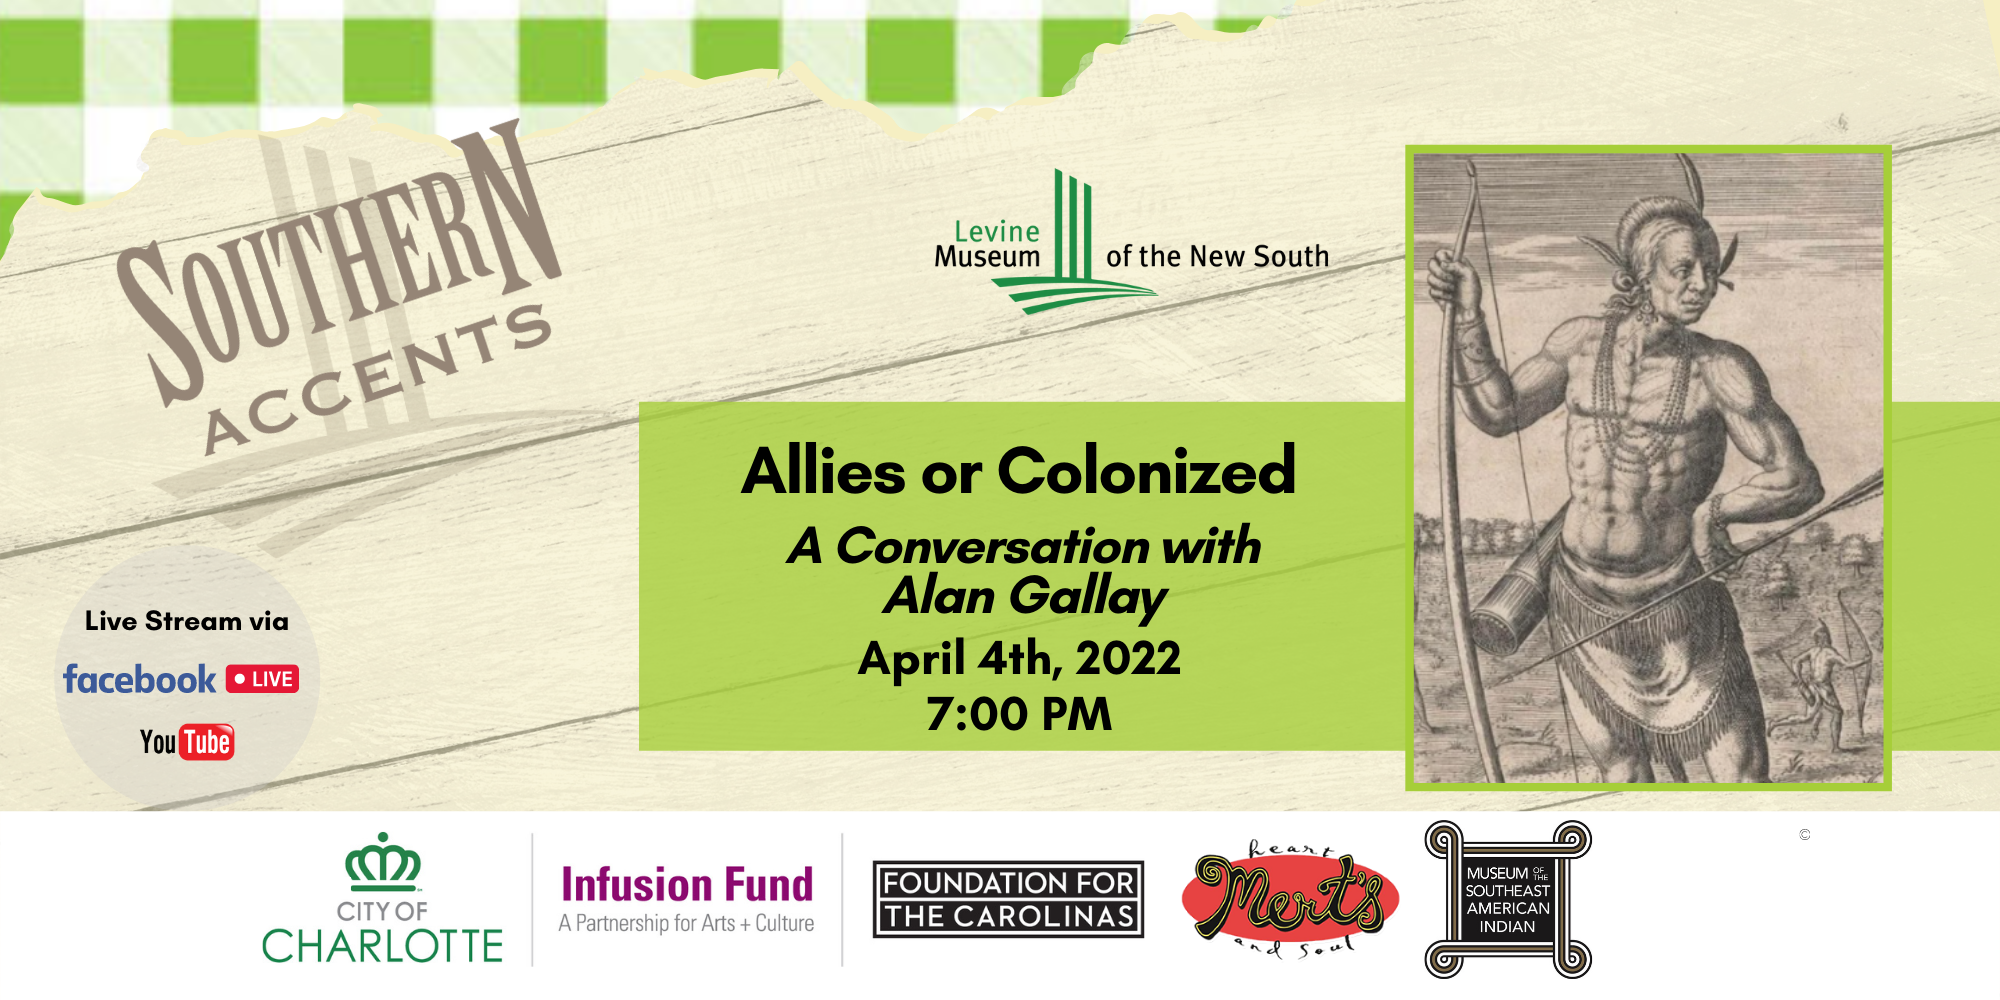 Levine Museum of the New South Southern Accents: Allies or Colonized Event Image